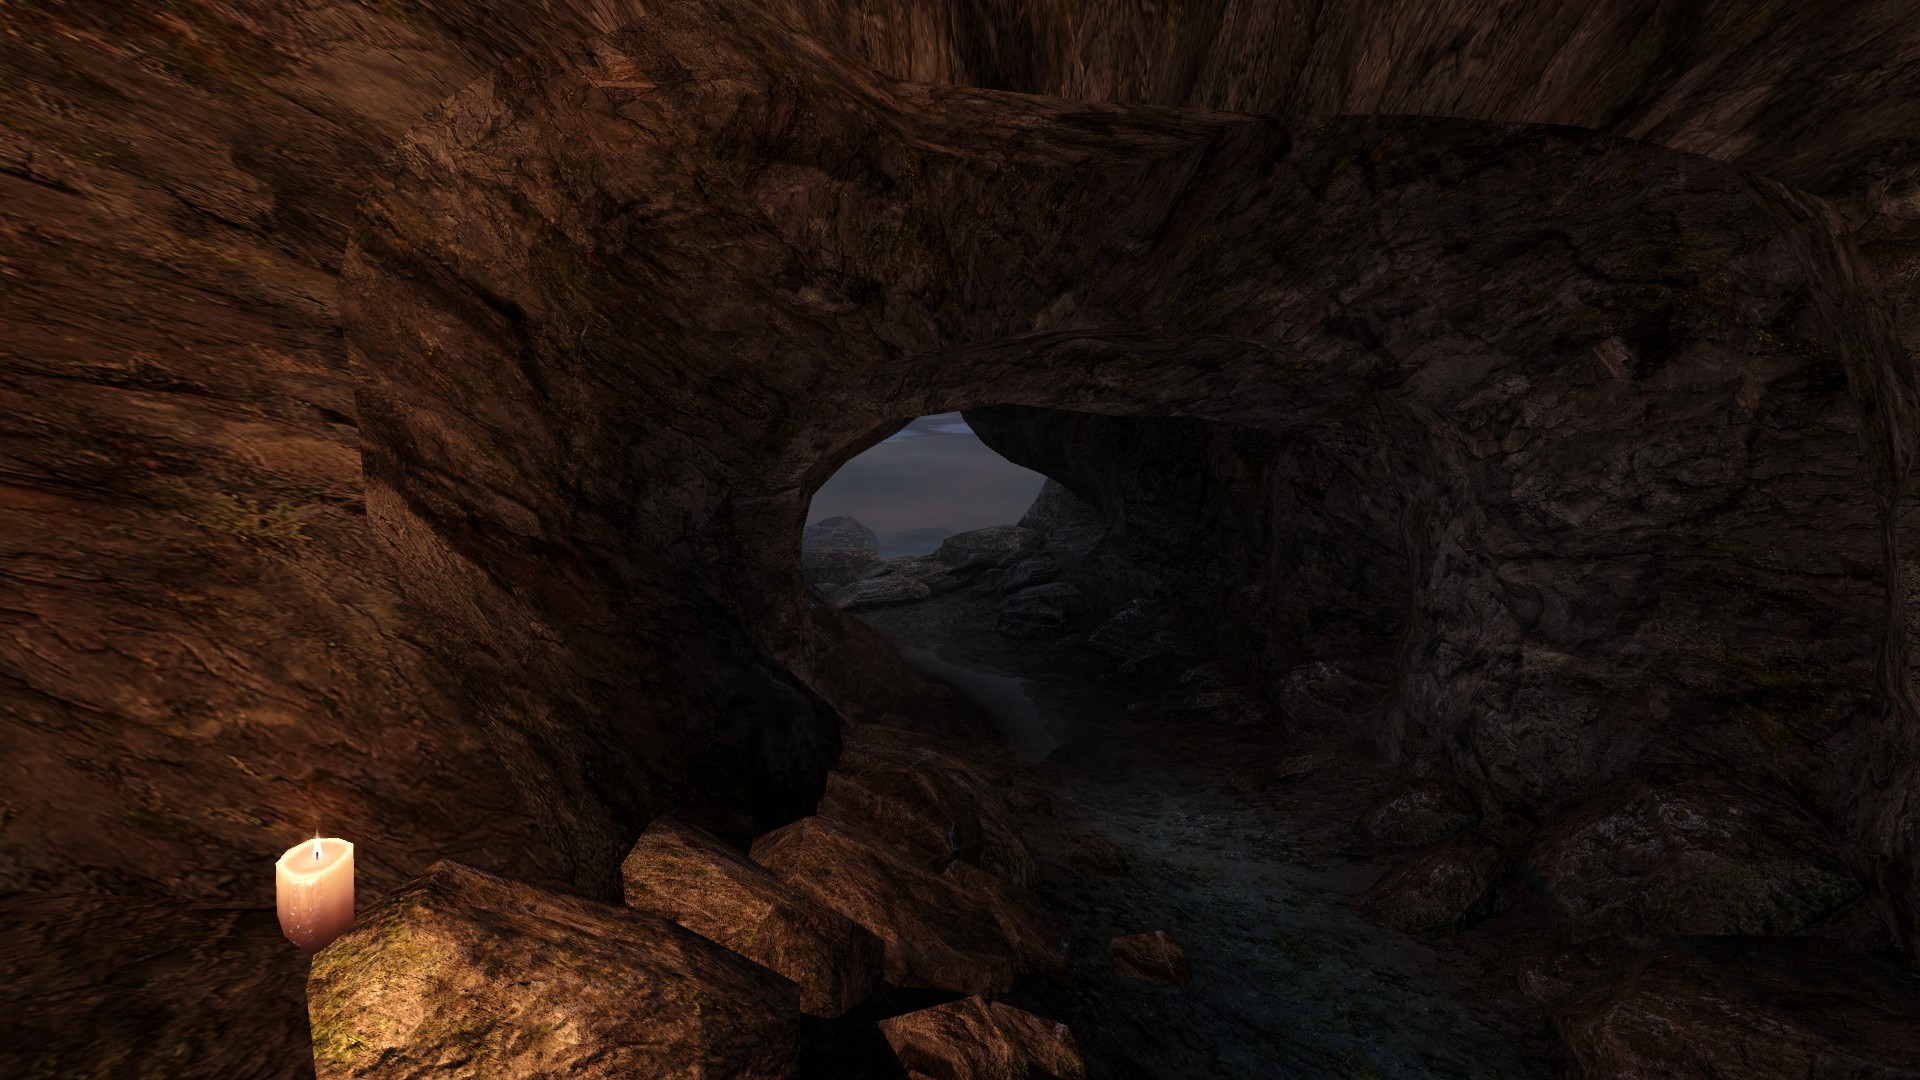 General 1920x1080 Dear Esther Source Engine entertainment video games cave PC gaming screen shot